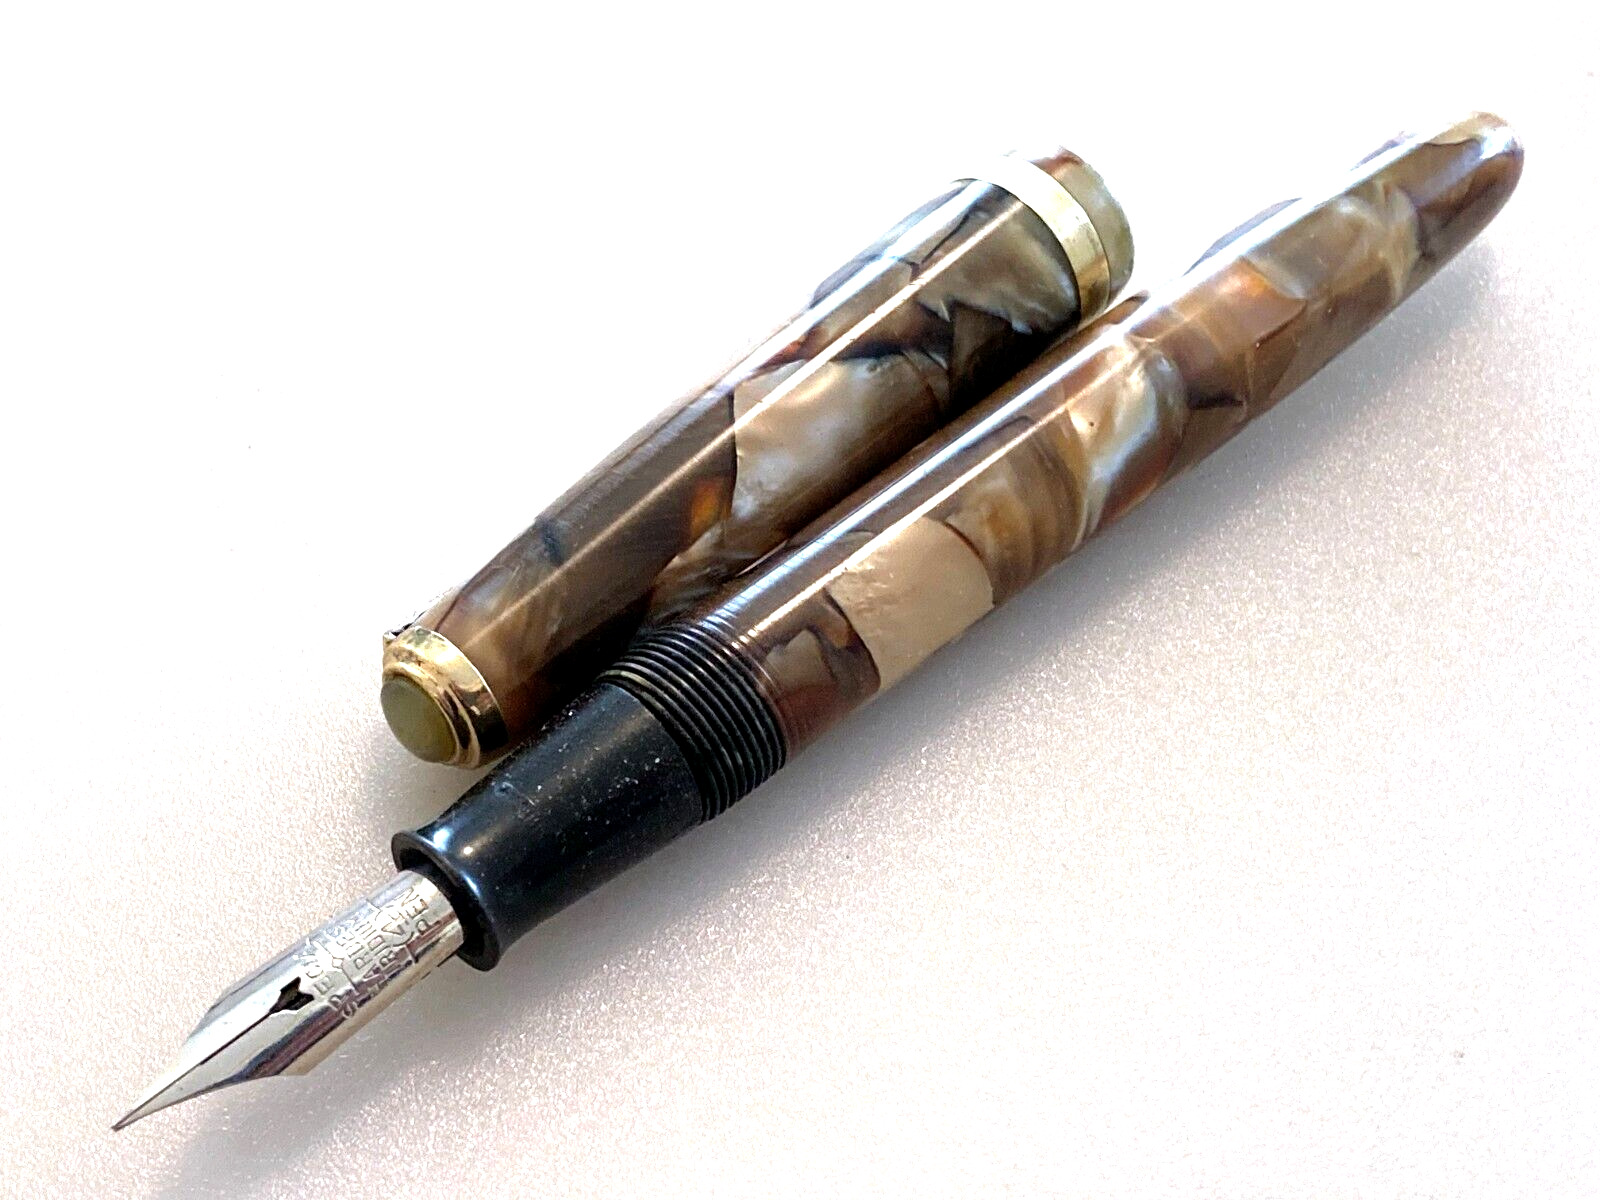 Japanese  vintage  fountain pen  with  ink sac from Japan